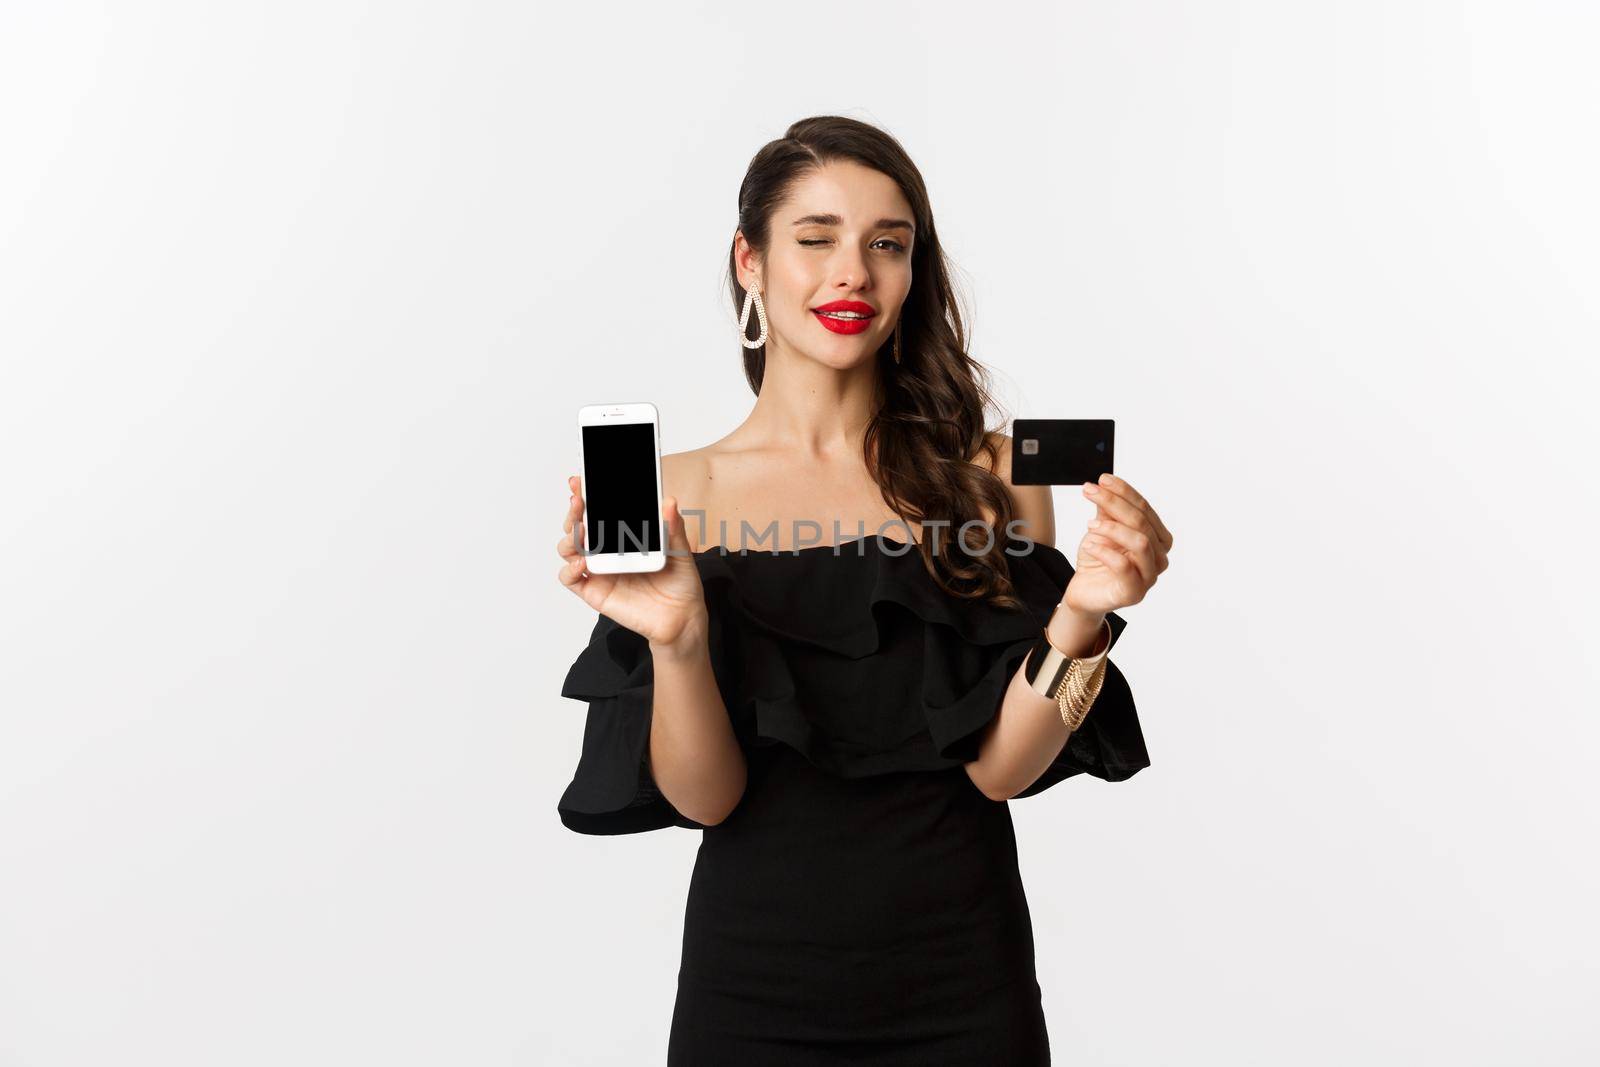 Fashion and shopping concept. Beautiful woman with red lips, winking at camera, showing smartphone screen and credit card, buying online, white background.